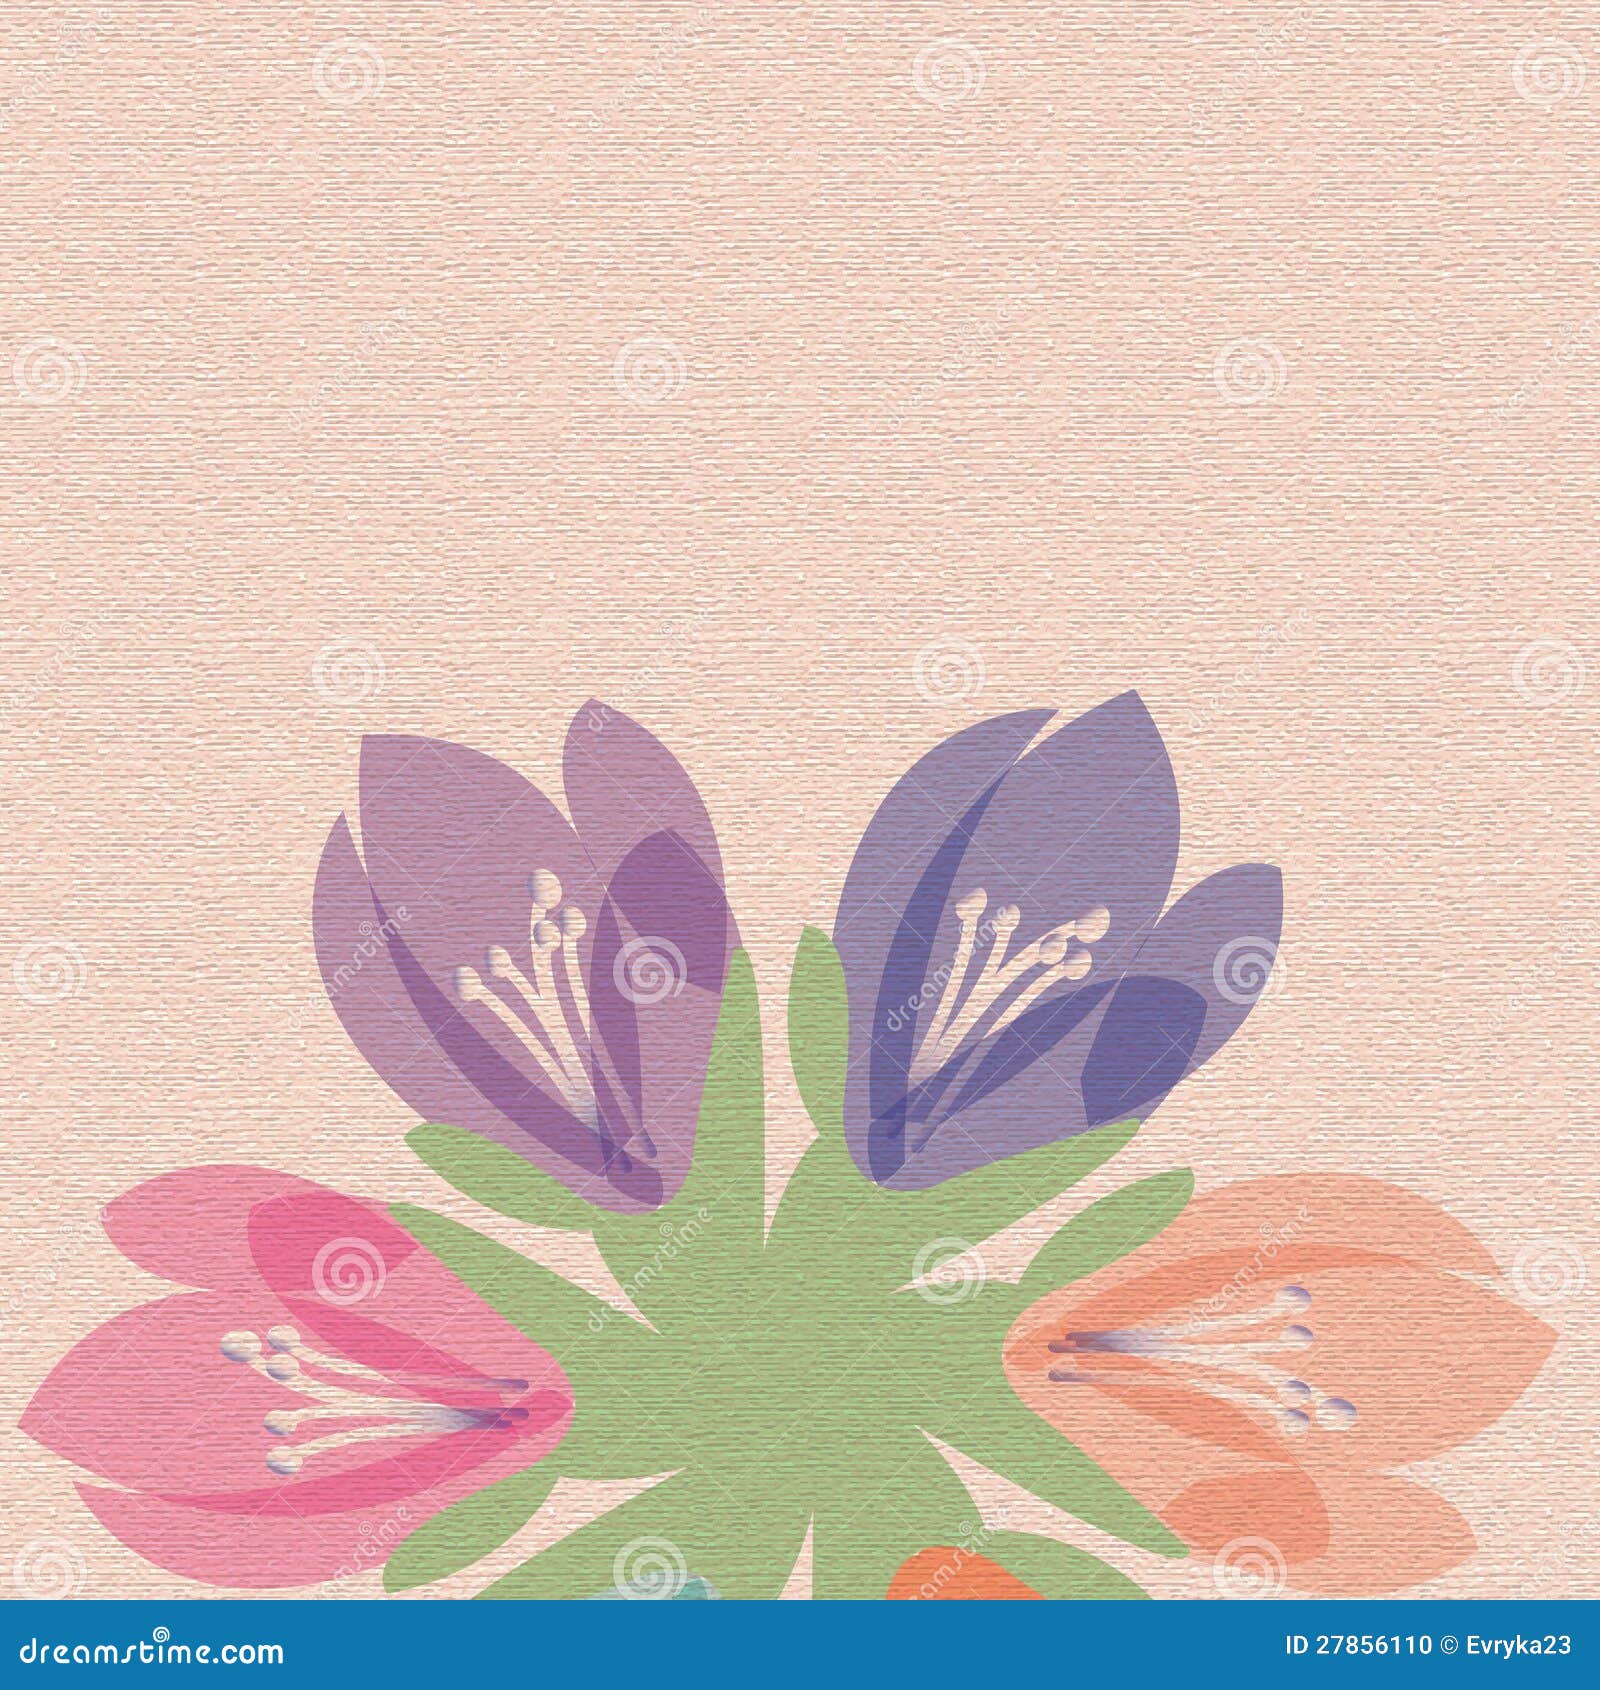 Spring Material Pattern Background Stock Vector - Illustration of flora